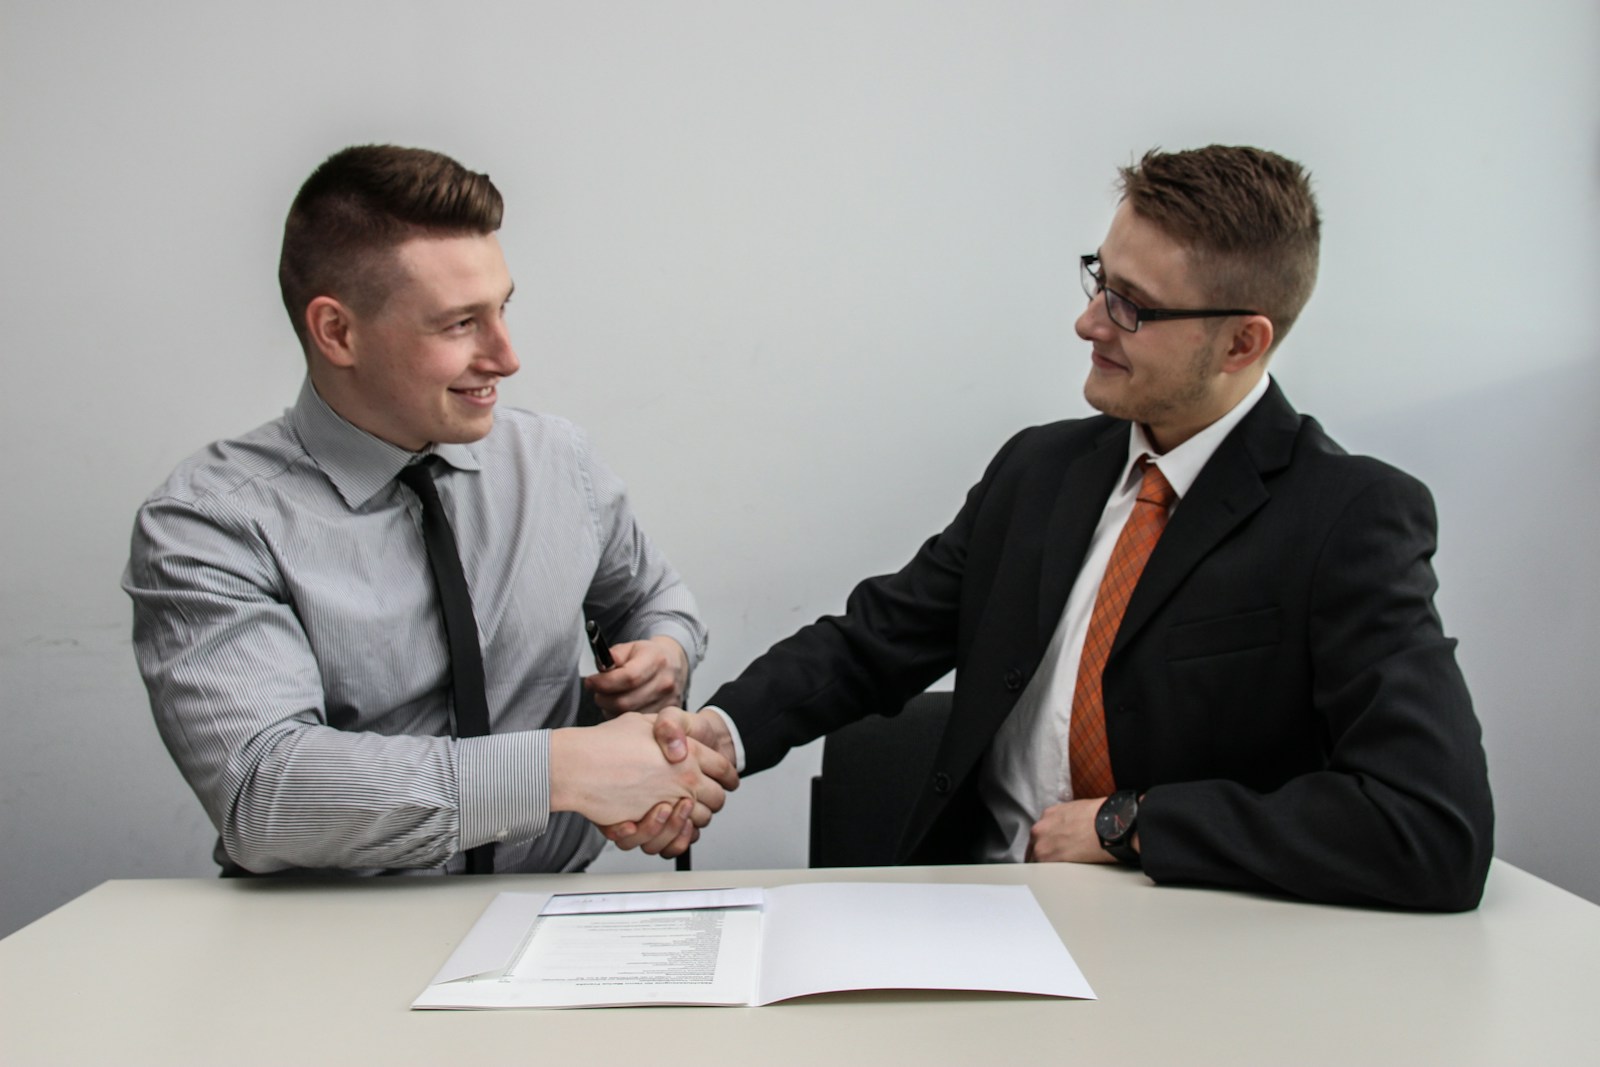 two men facing each other while shake hands and smiling becaue they have business insurance